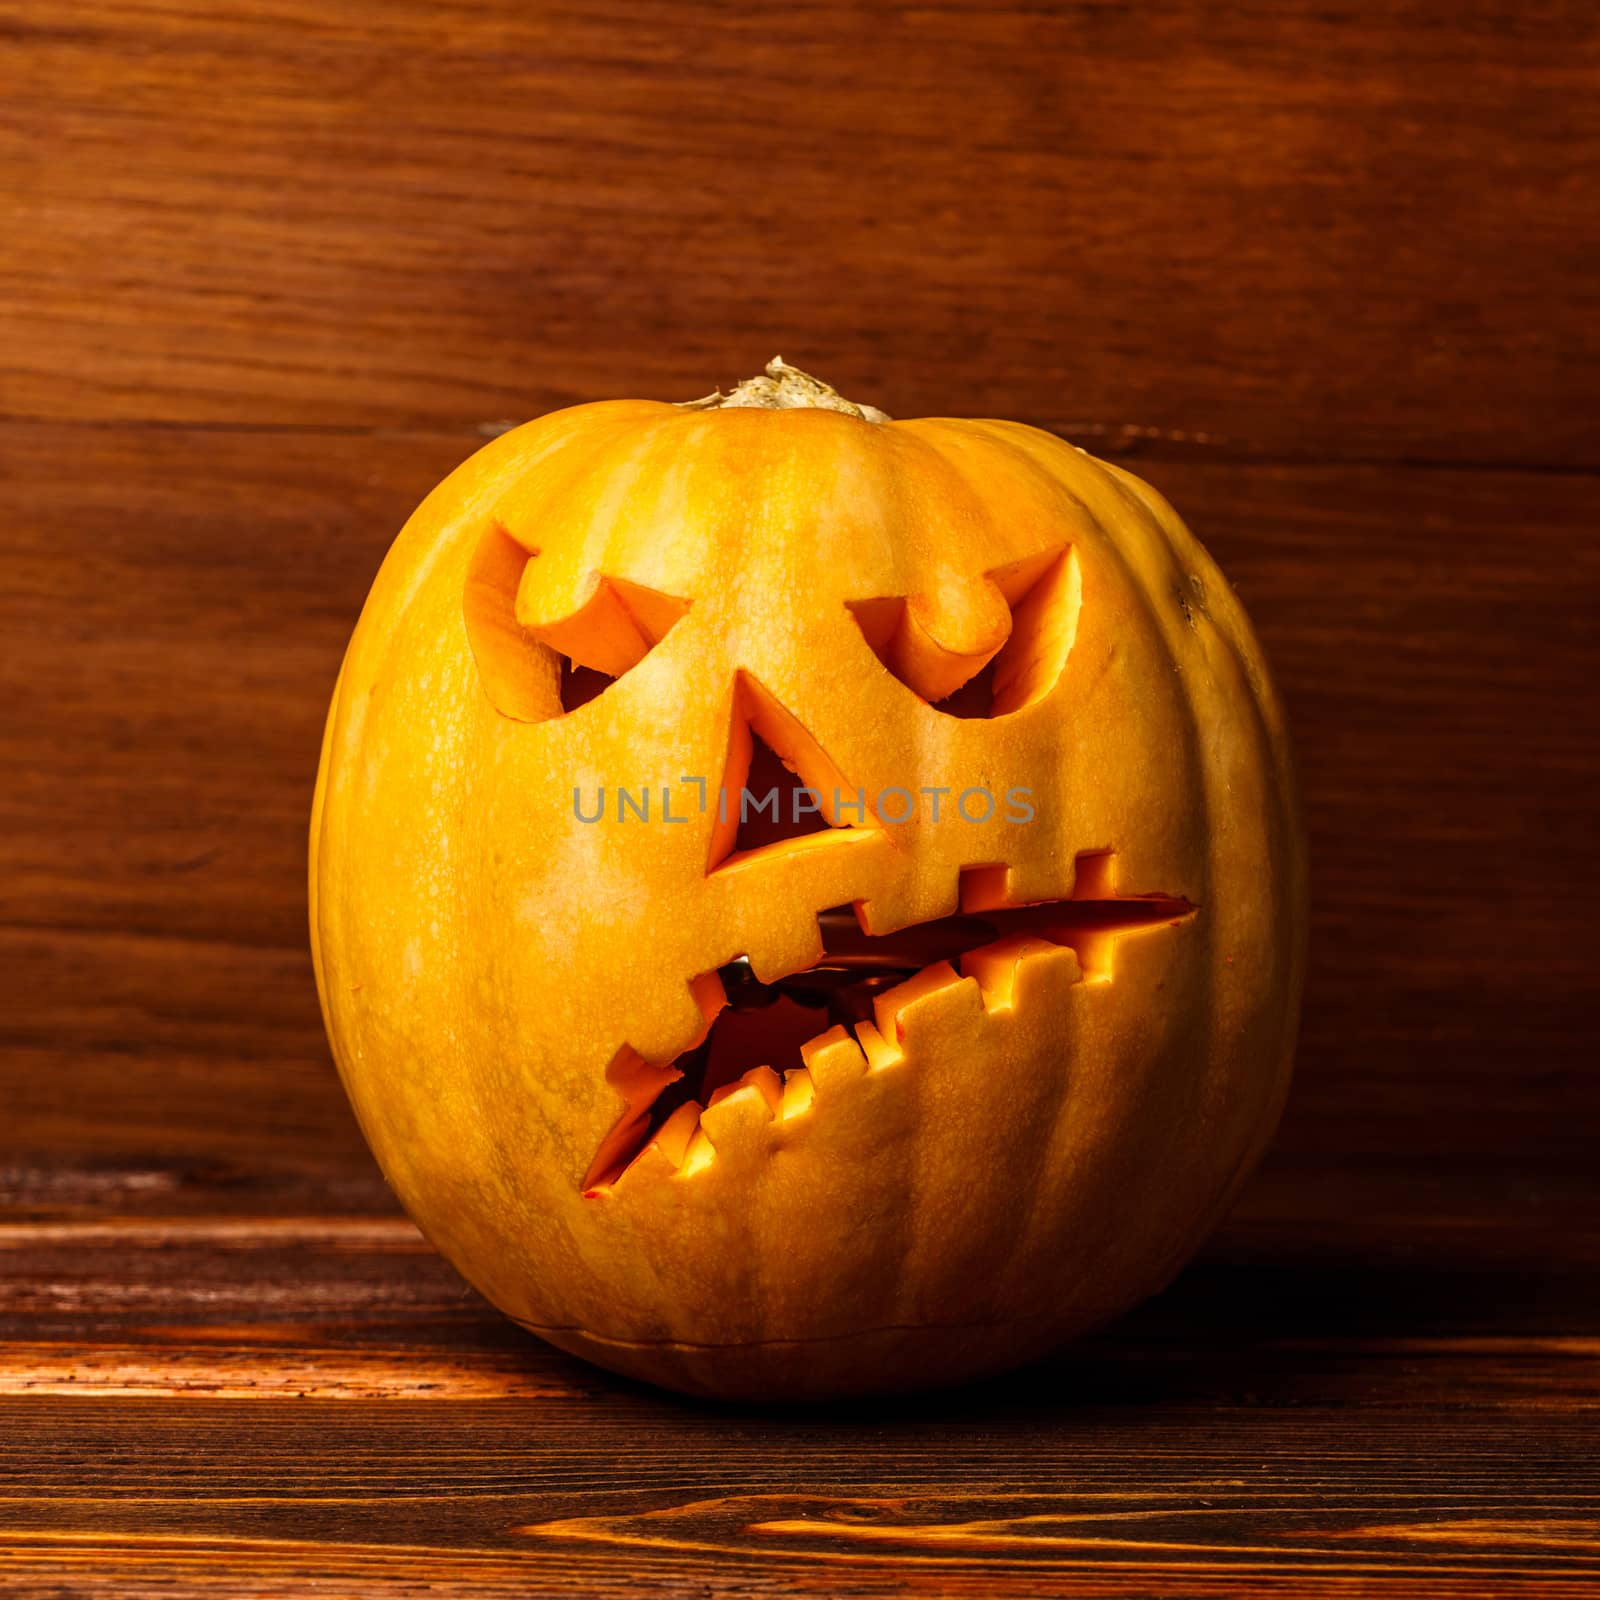 Scary Halloween pumpkin isolated on a wooden background . Scary glowing face trick or treat. Concept of halloween pumpkin on wooden planks. 